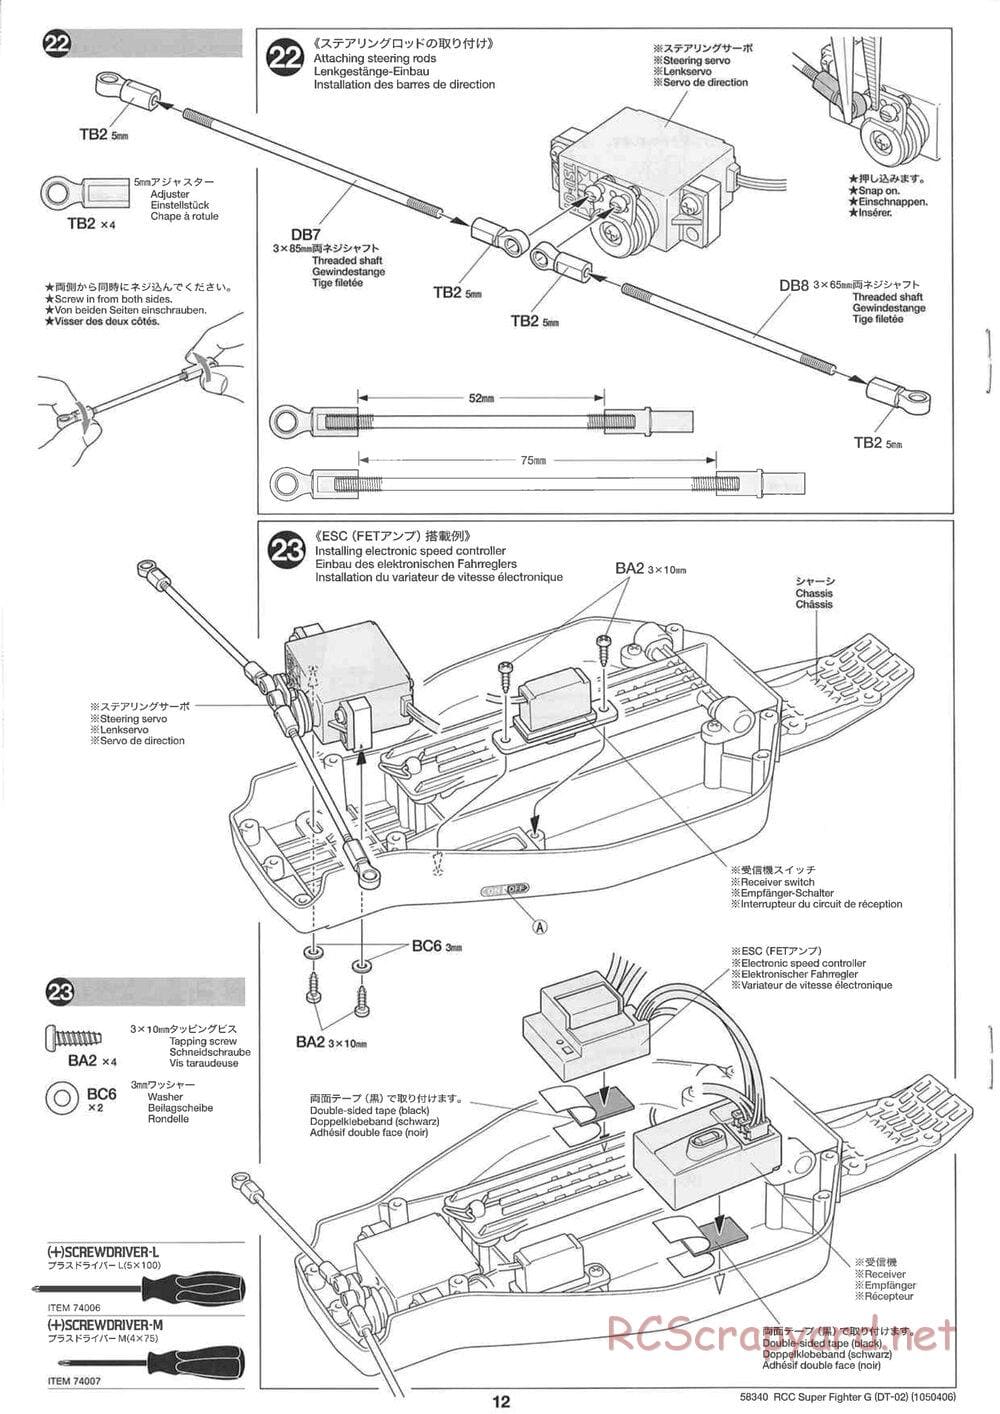 Tamiya - Super Fighter G Chassis - Manual - Page 12